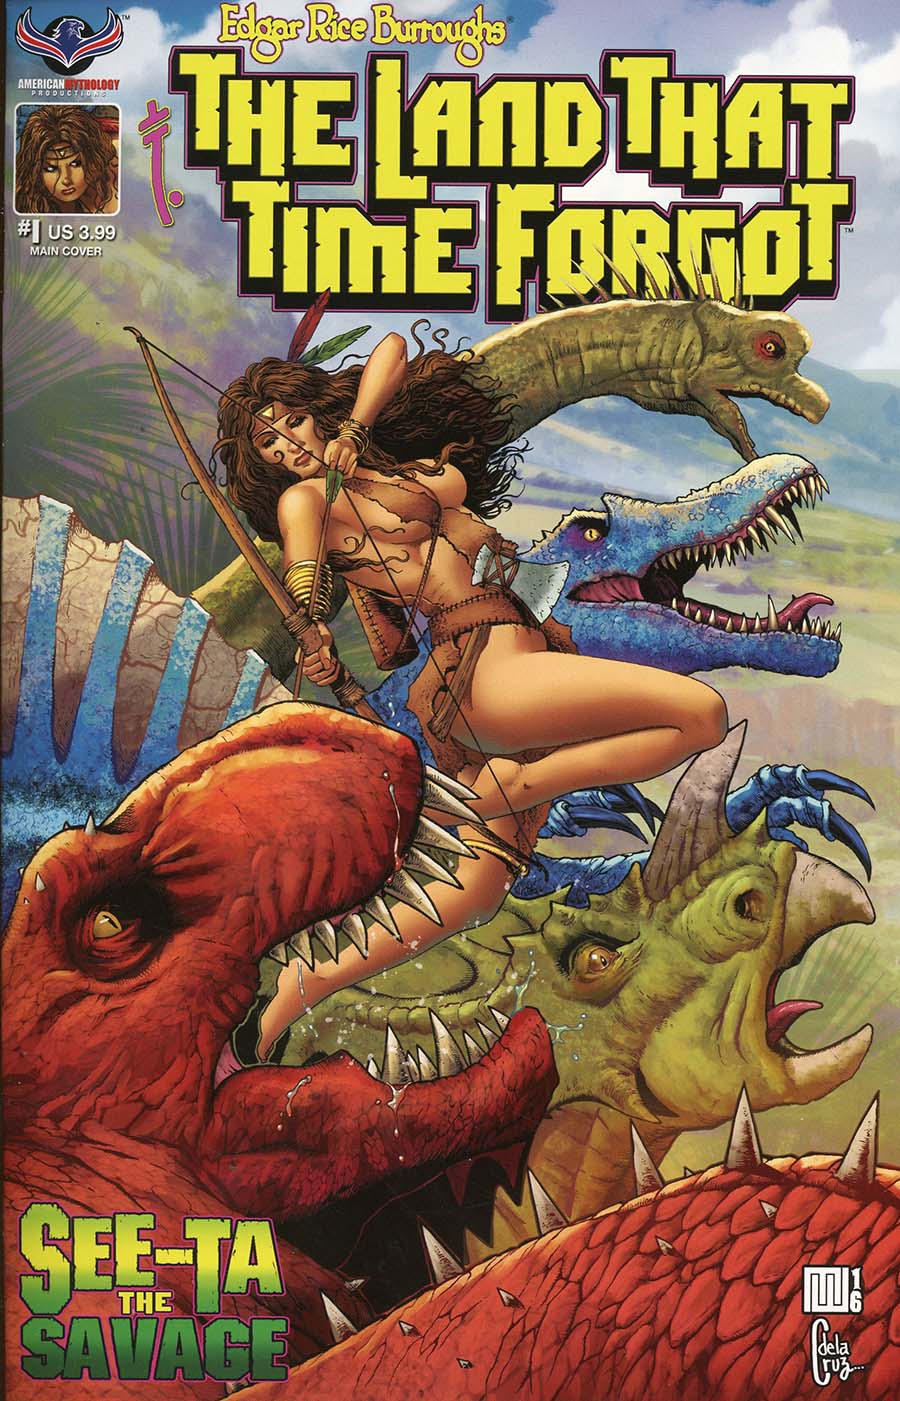 Edgar Rice Burroughs Land That Time Forgot See-Ta The Savage #1 Cover A Regular Mike Wolfer & Ceci de la Cruz Cover